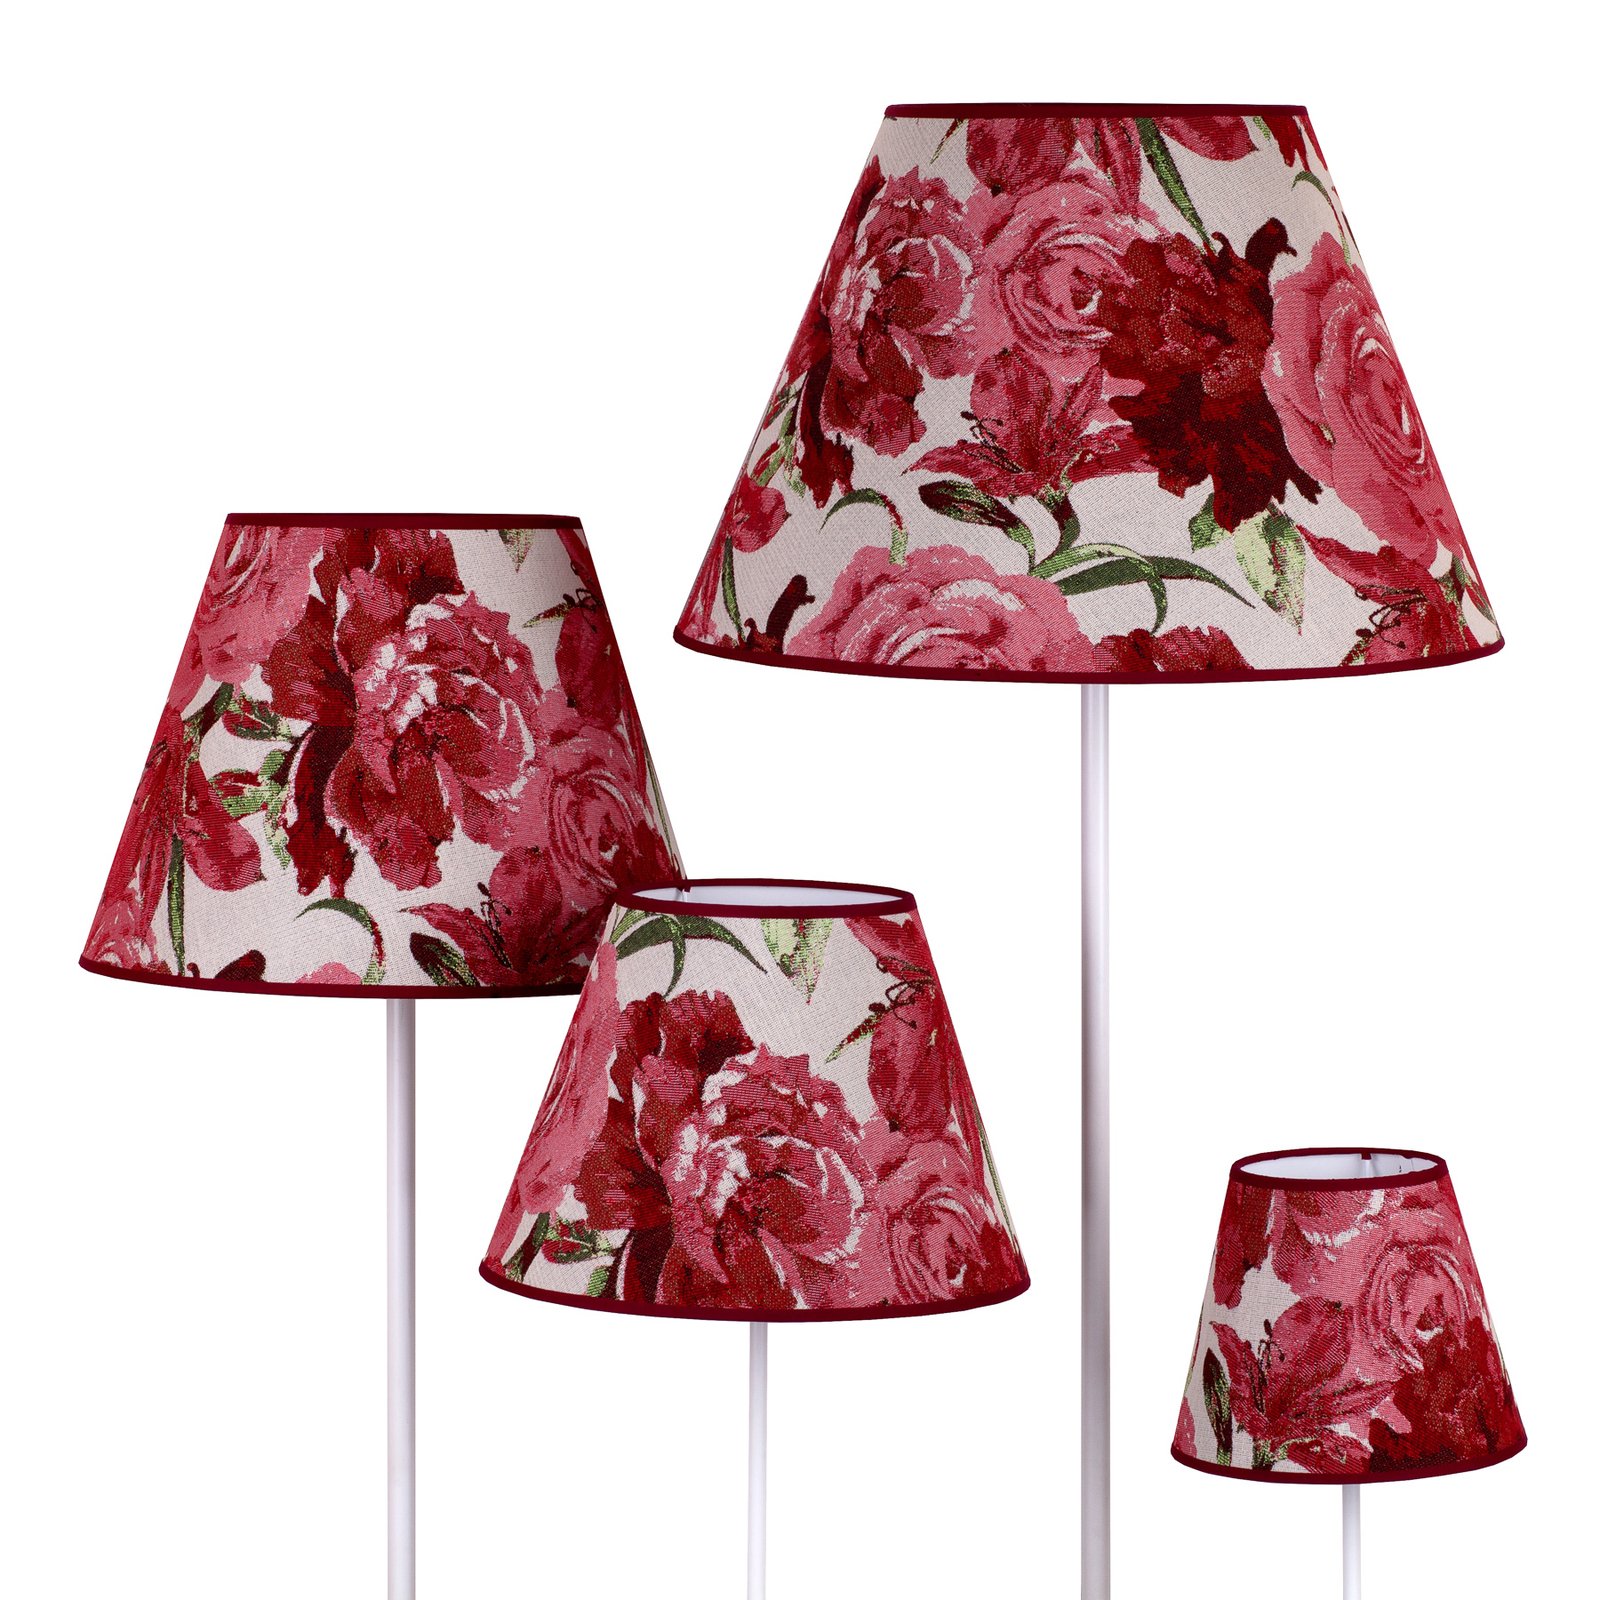 Sofia lampshade height 21 cm, floral pattern red